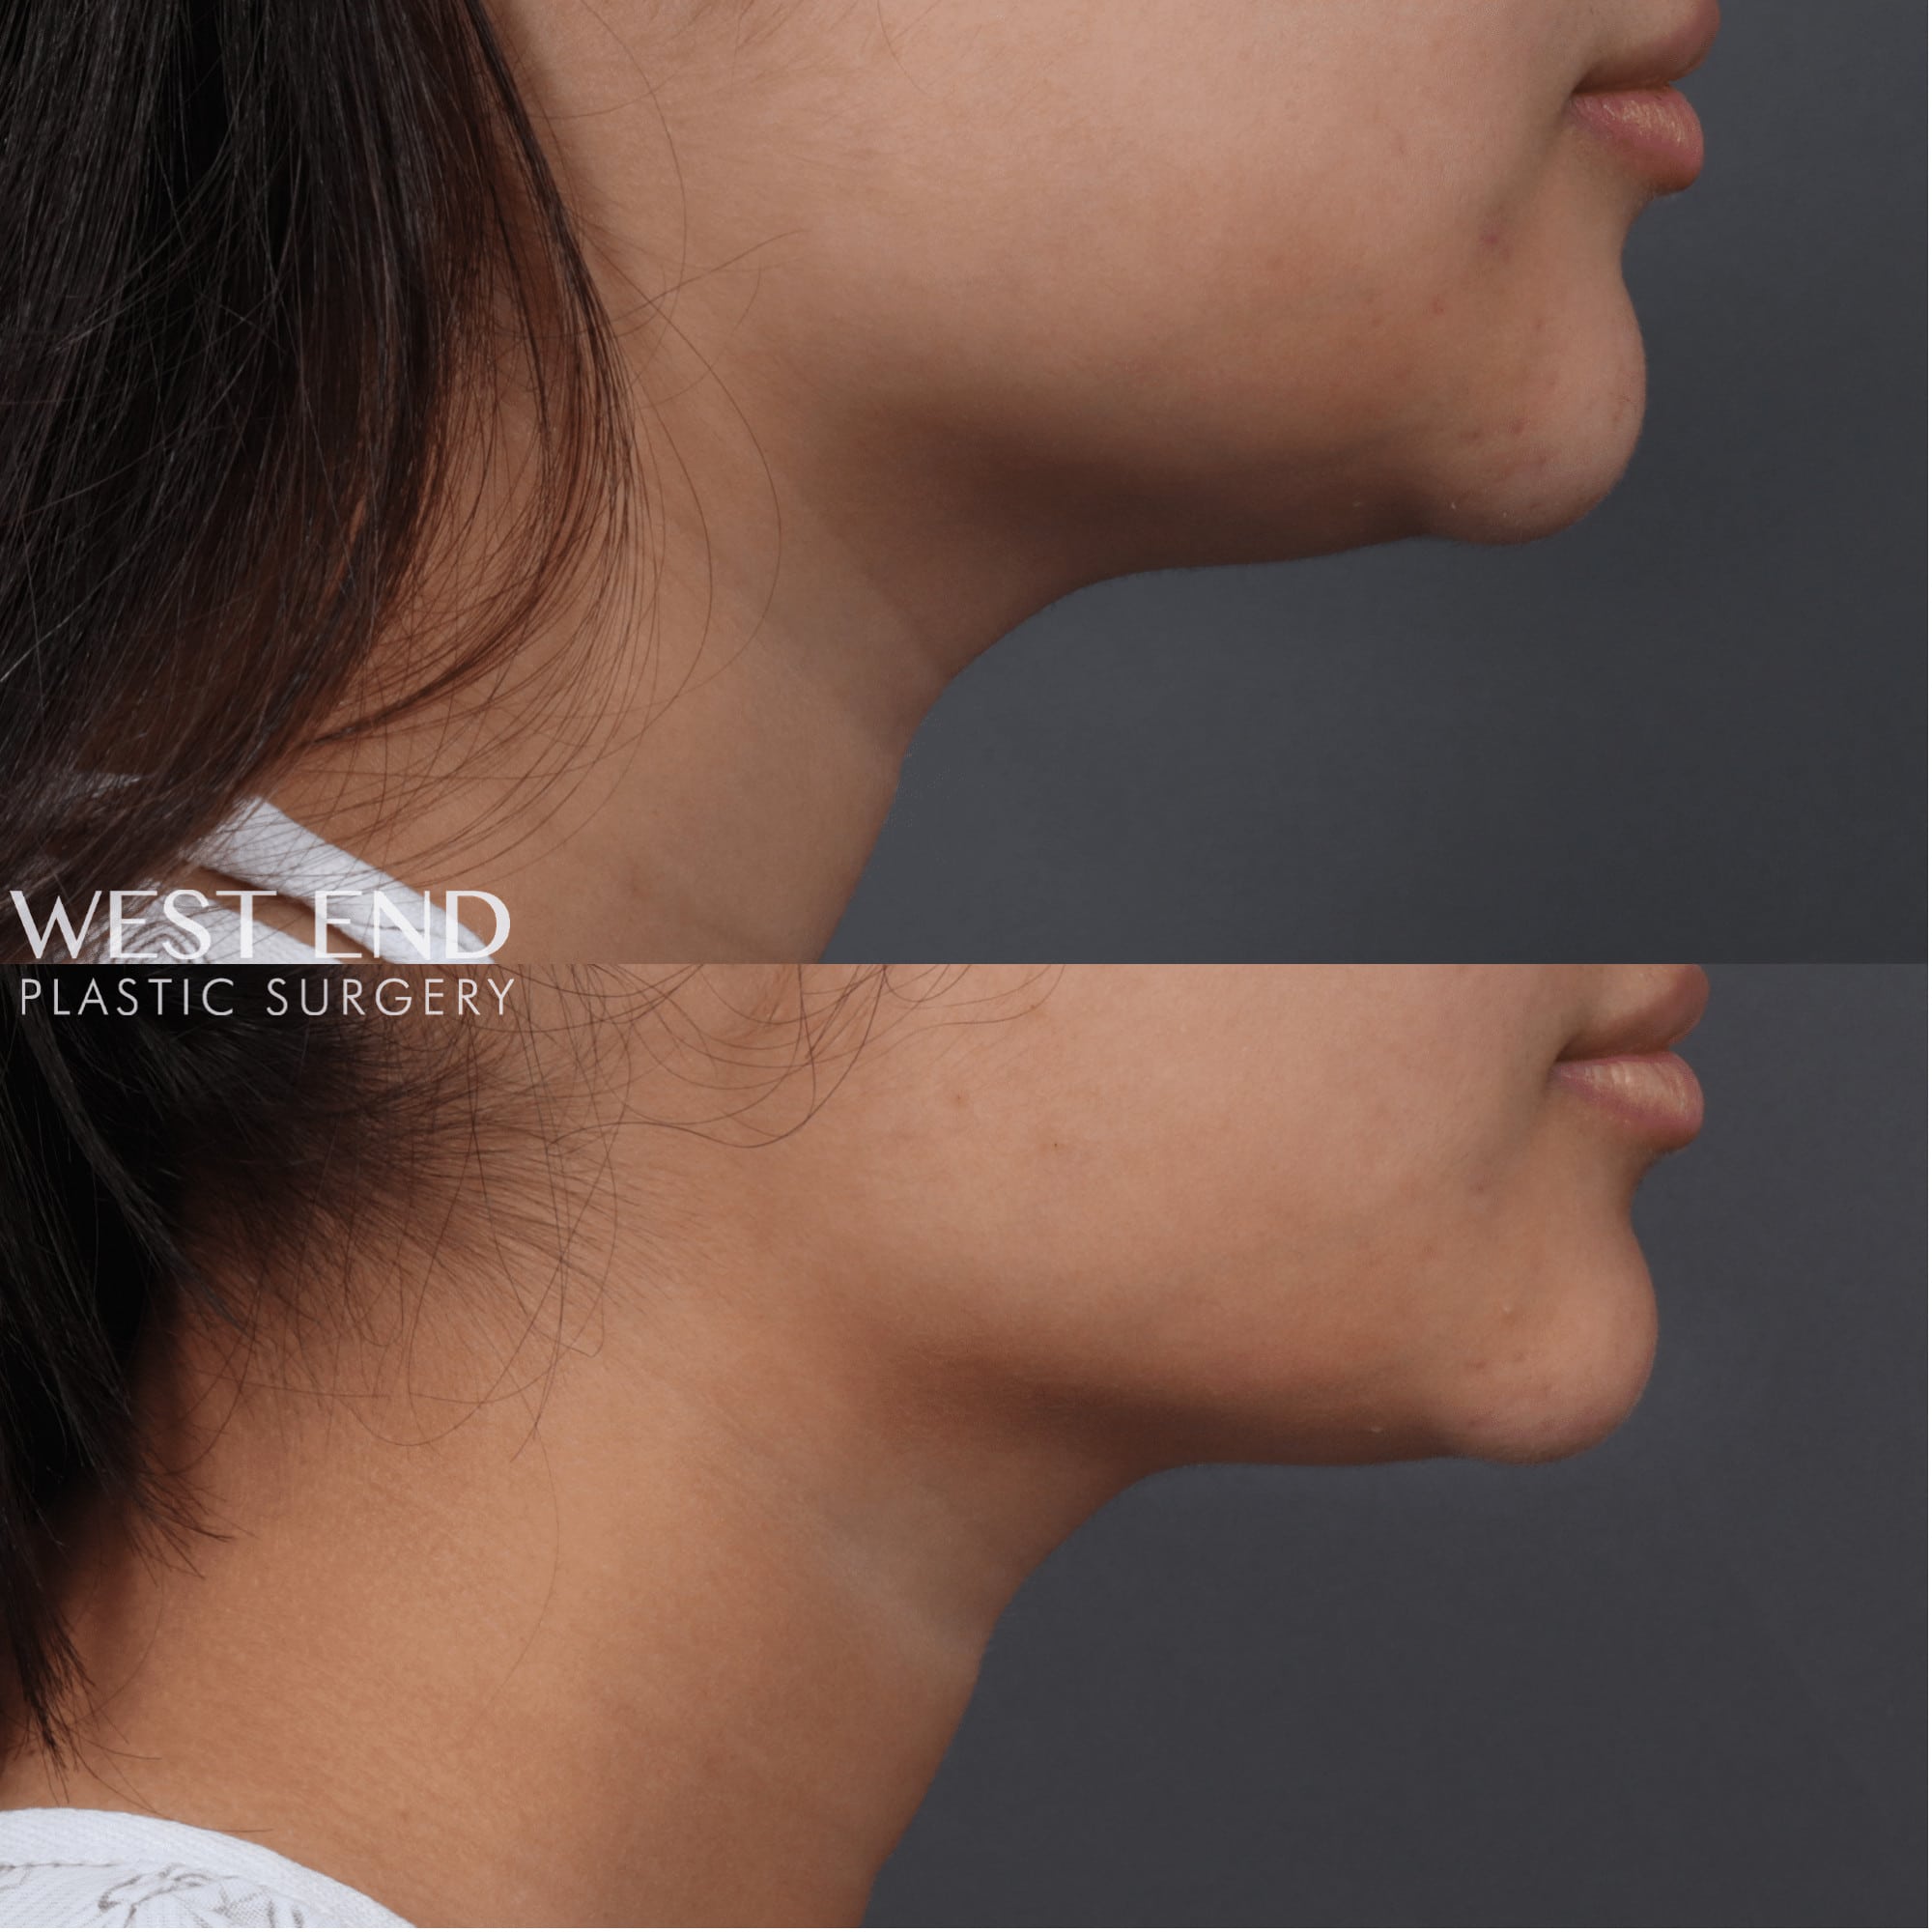 before after coolsculpting west end plastic surgery 1